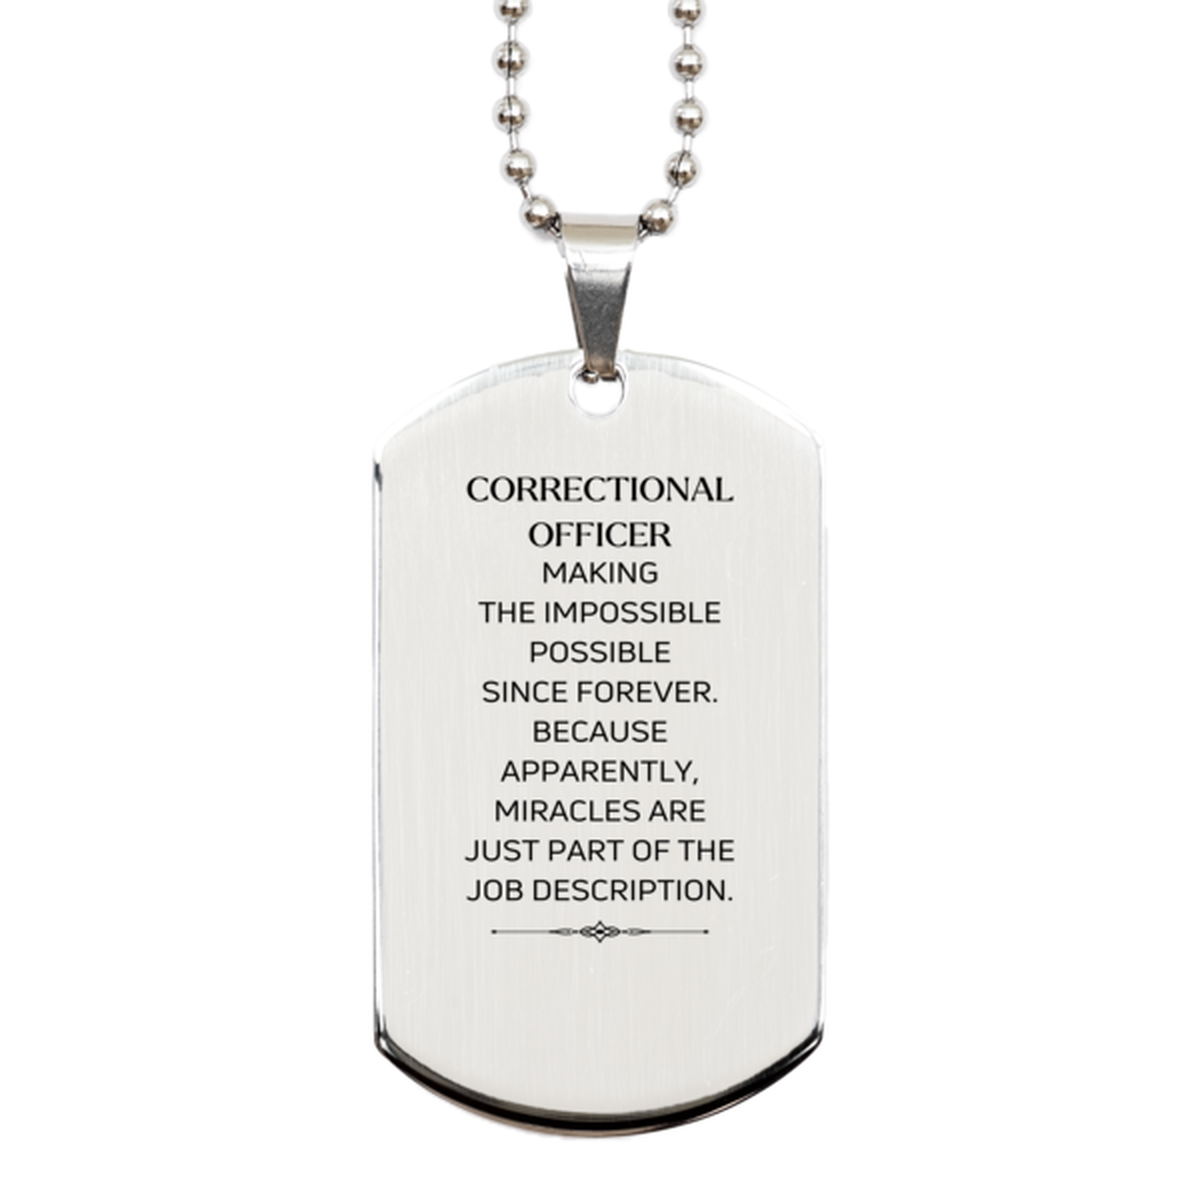 Funny Correctional Officer Gifts, Miracles are just part of the job description, Inspirational Birthday Silver Dog Tag For Correctional Officer, Men, Women, Coworkers, Friends, Boss